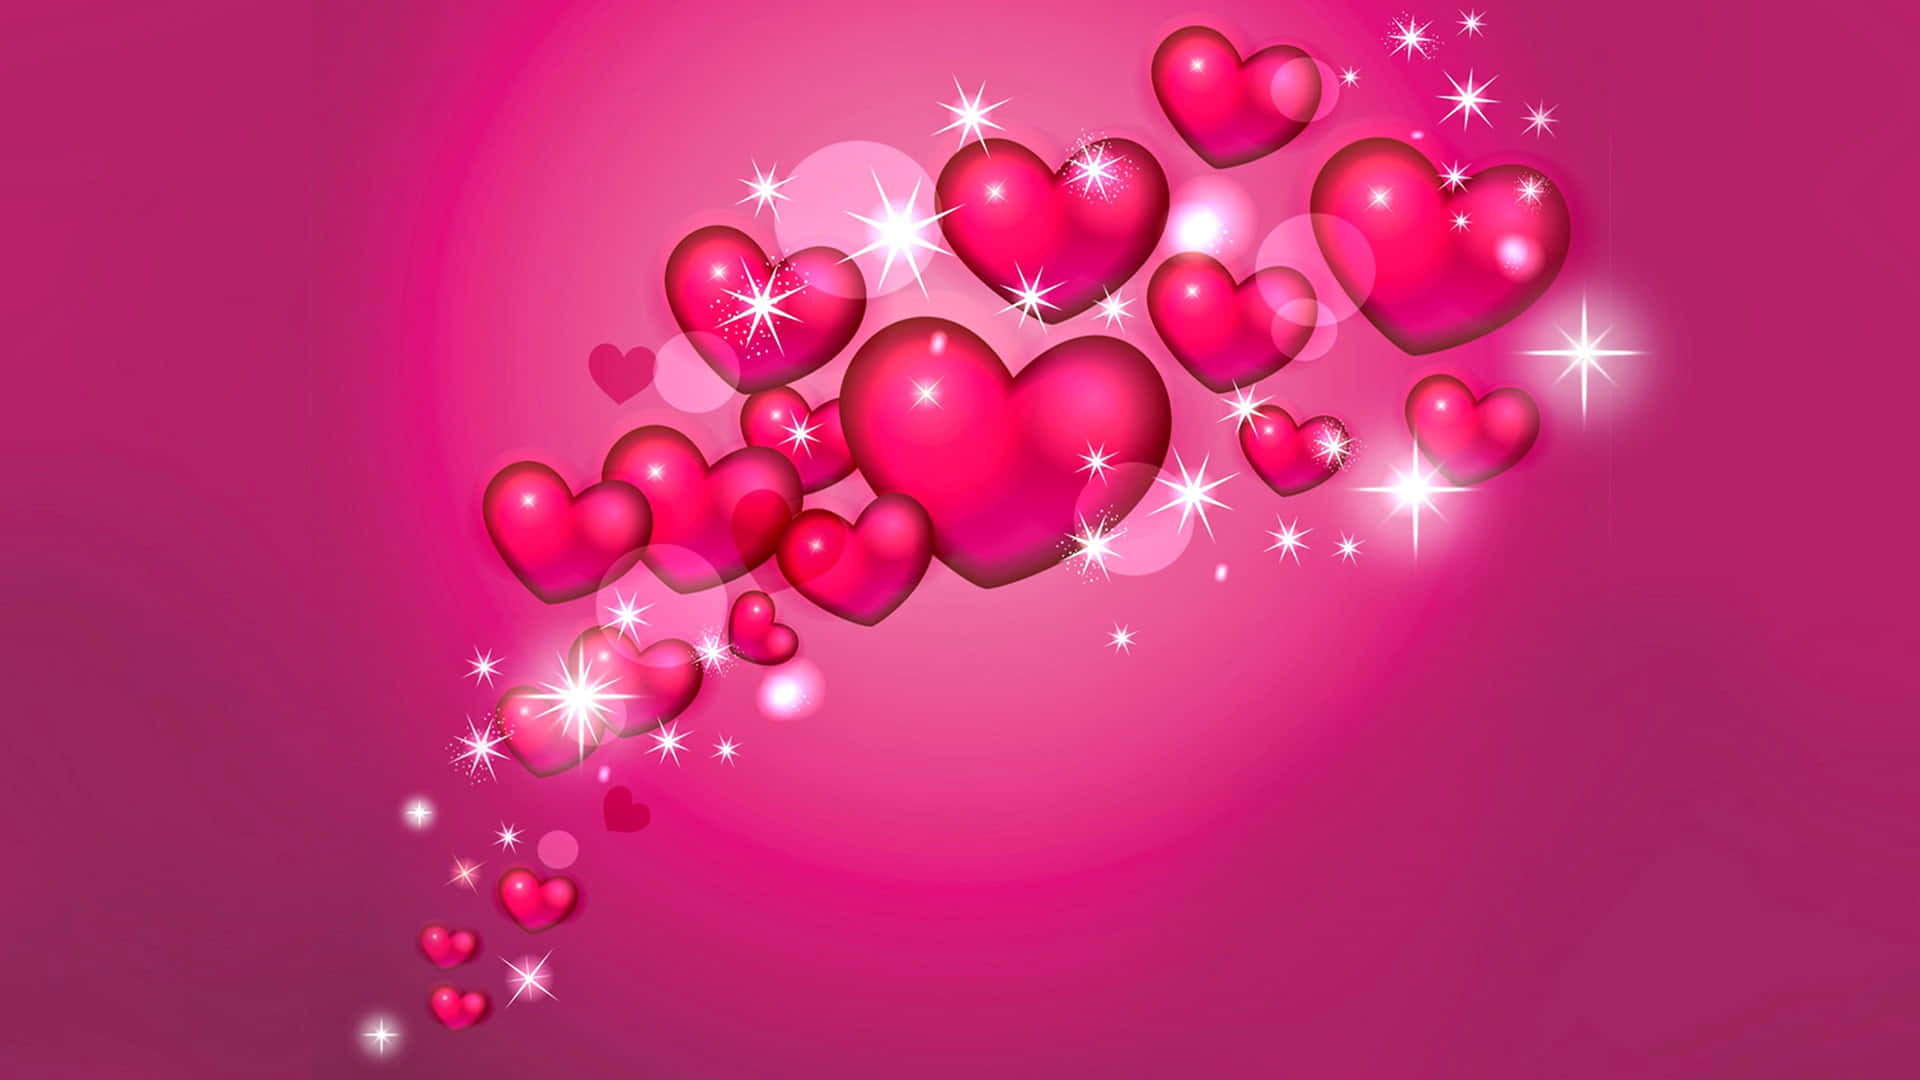 Pink Love - A Beautiful Expression of Romance Wallpaper